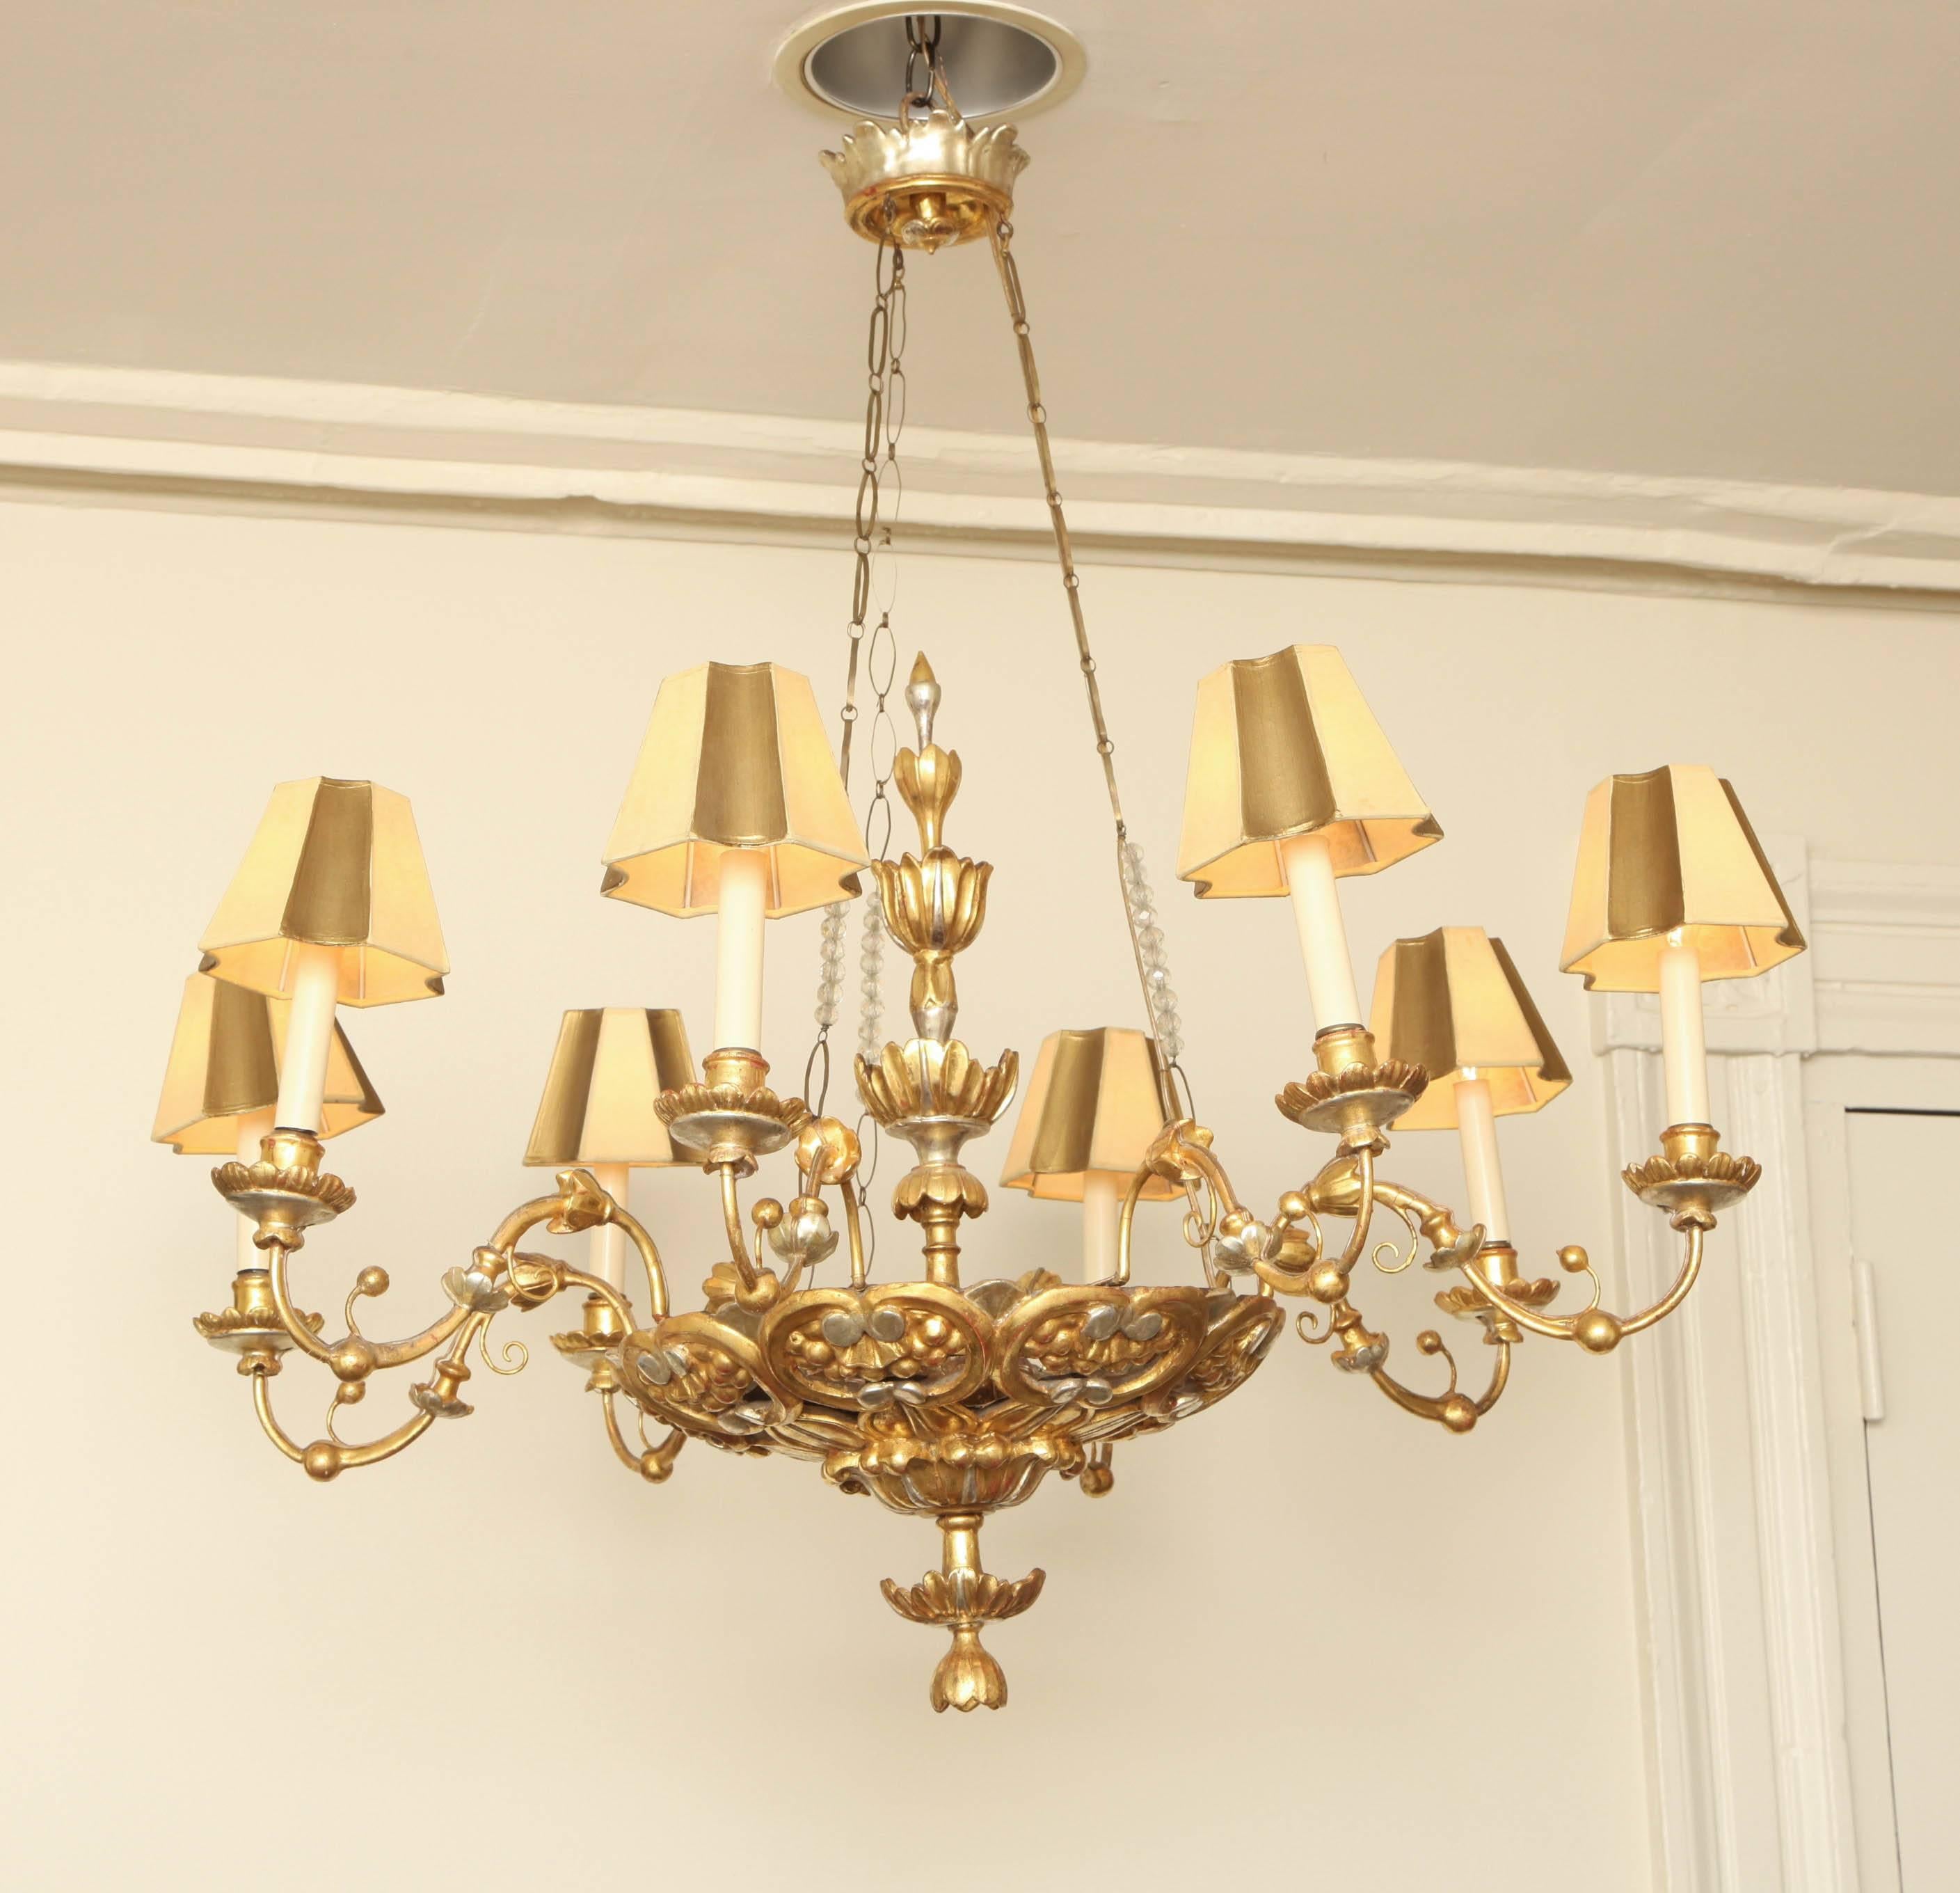 Carved silvered and giltwood chandelier with handmade gilt-metal chains interspersed with 19th century crystal beads. The pierced basket with a foliate knob finial and carved with stylized grape clusters. Wired for electricity.

Provenance: Bernd